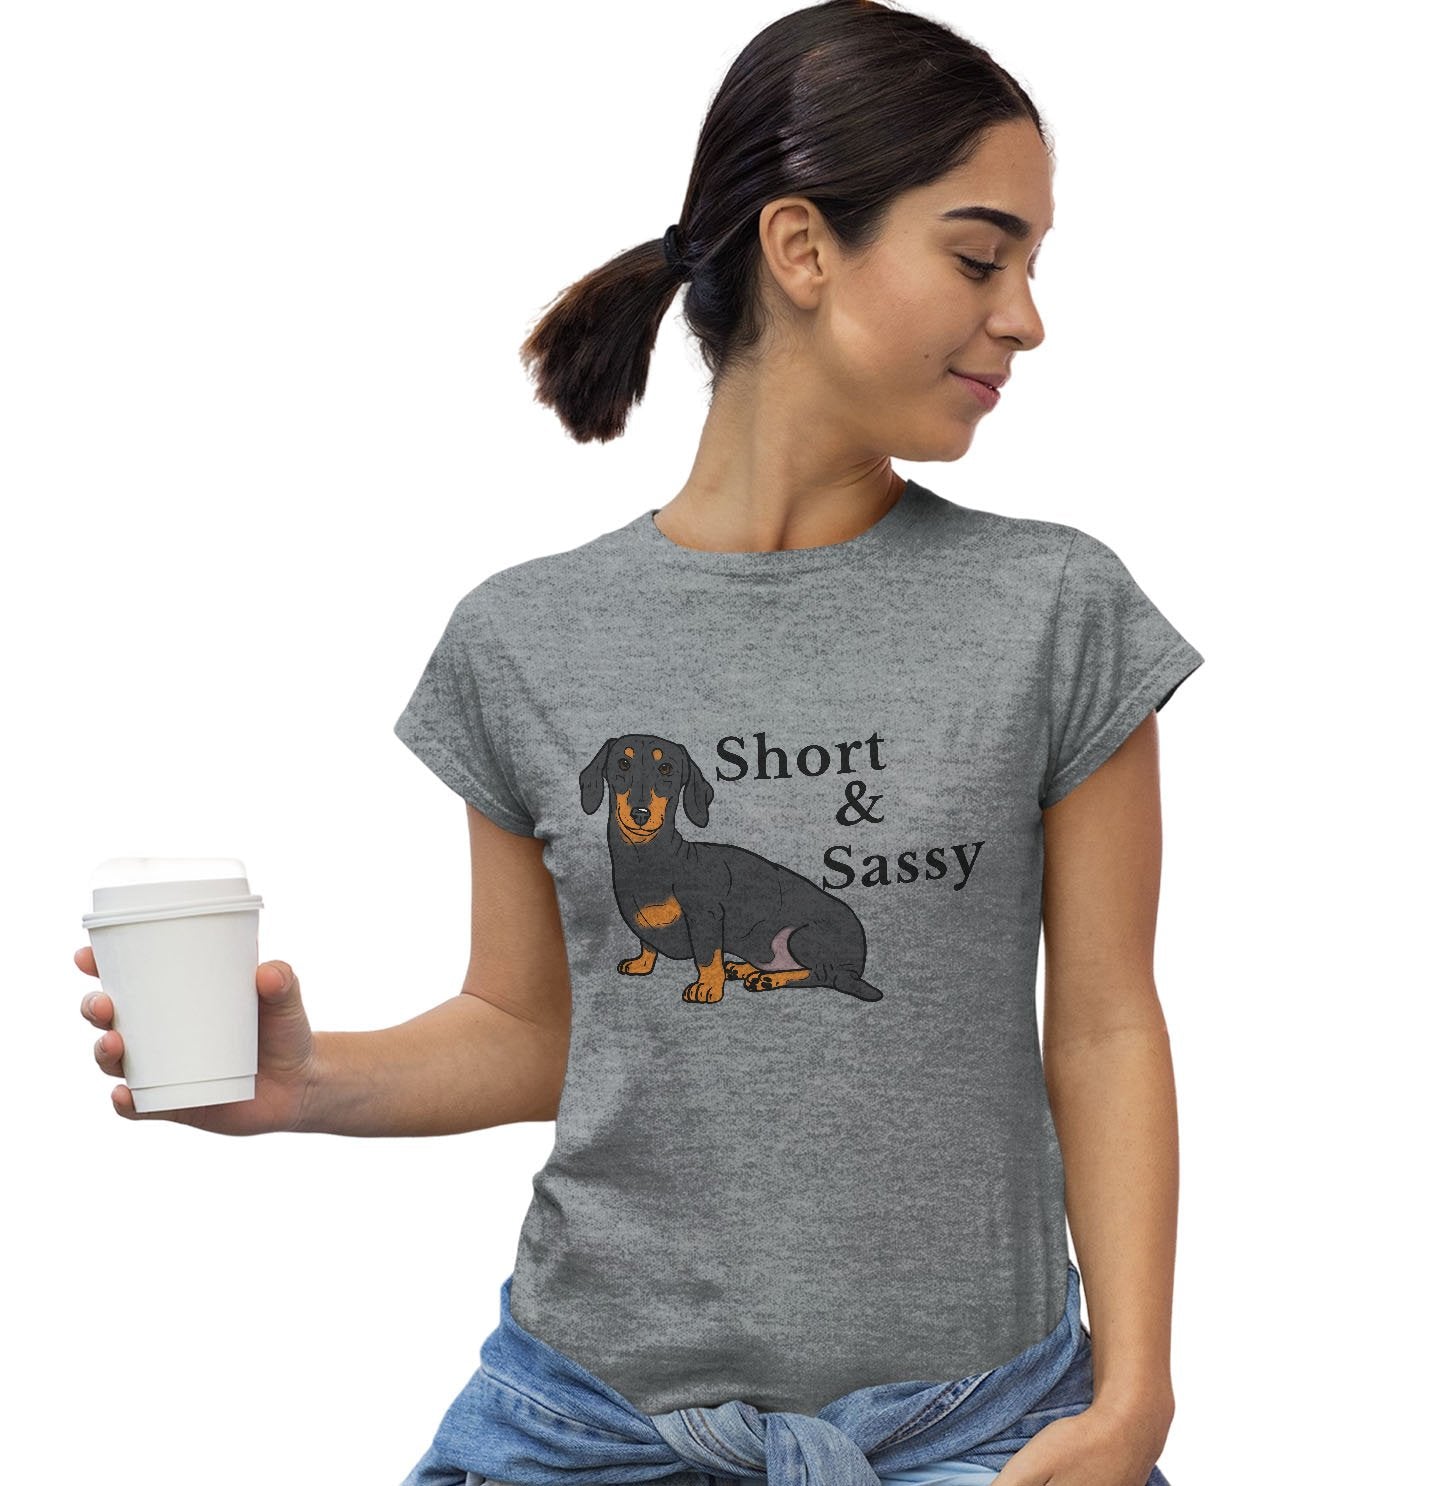 Short and Sassy - Women's Fitted T-Shirt